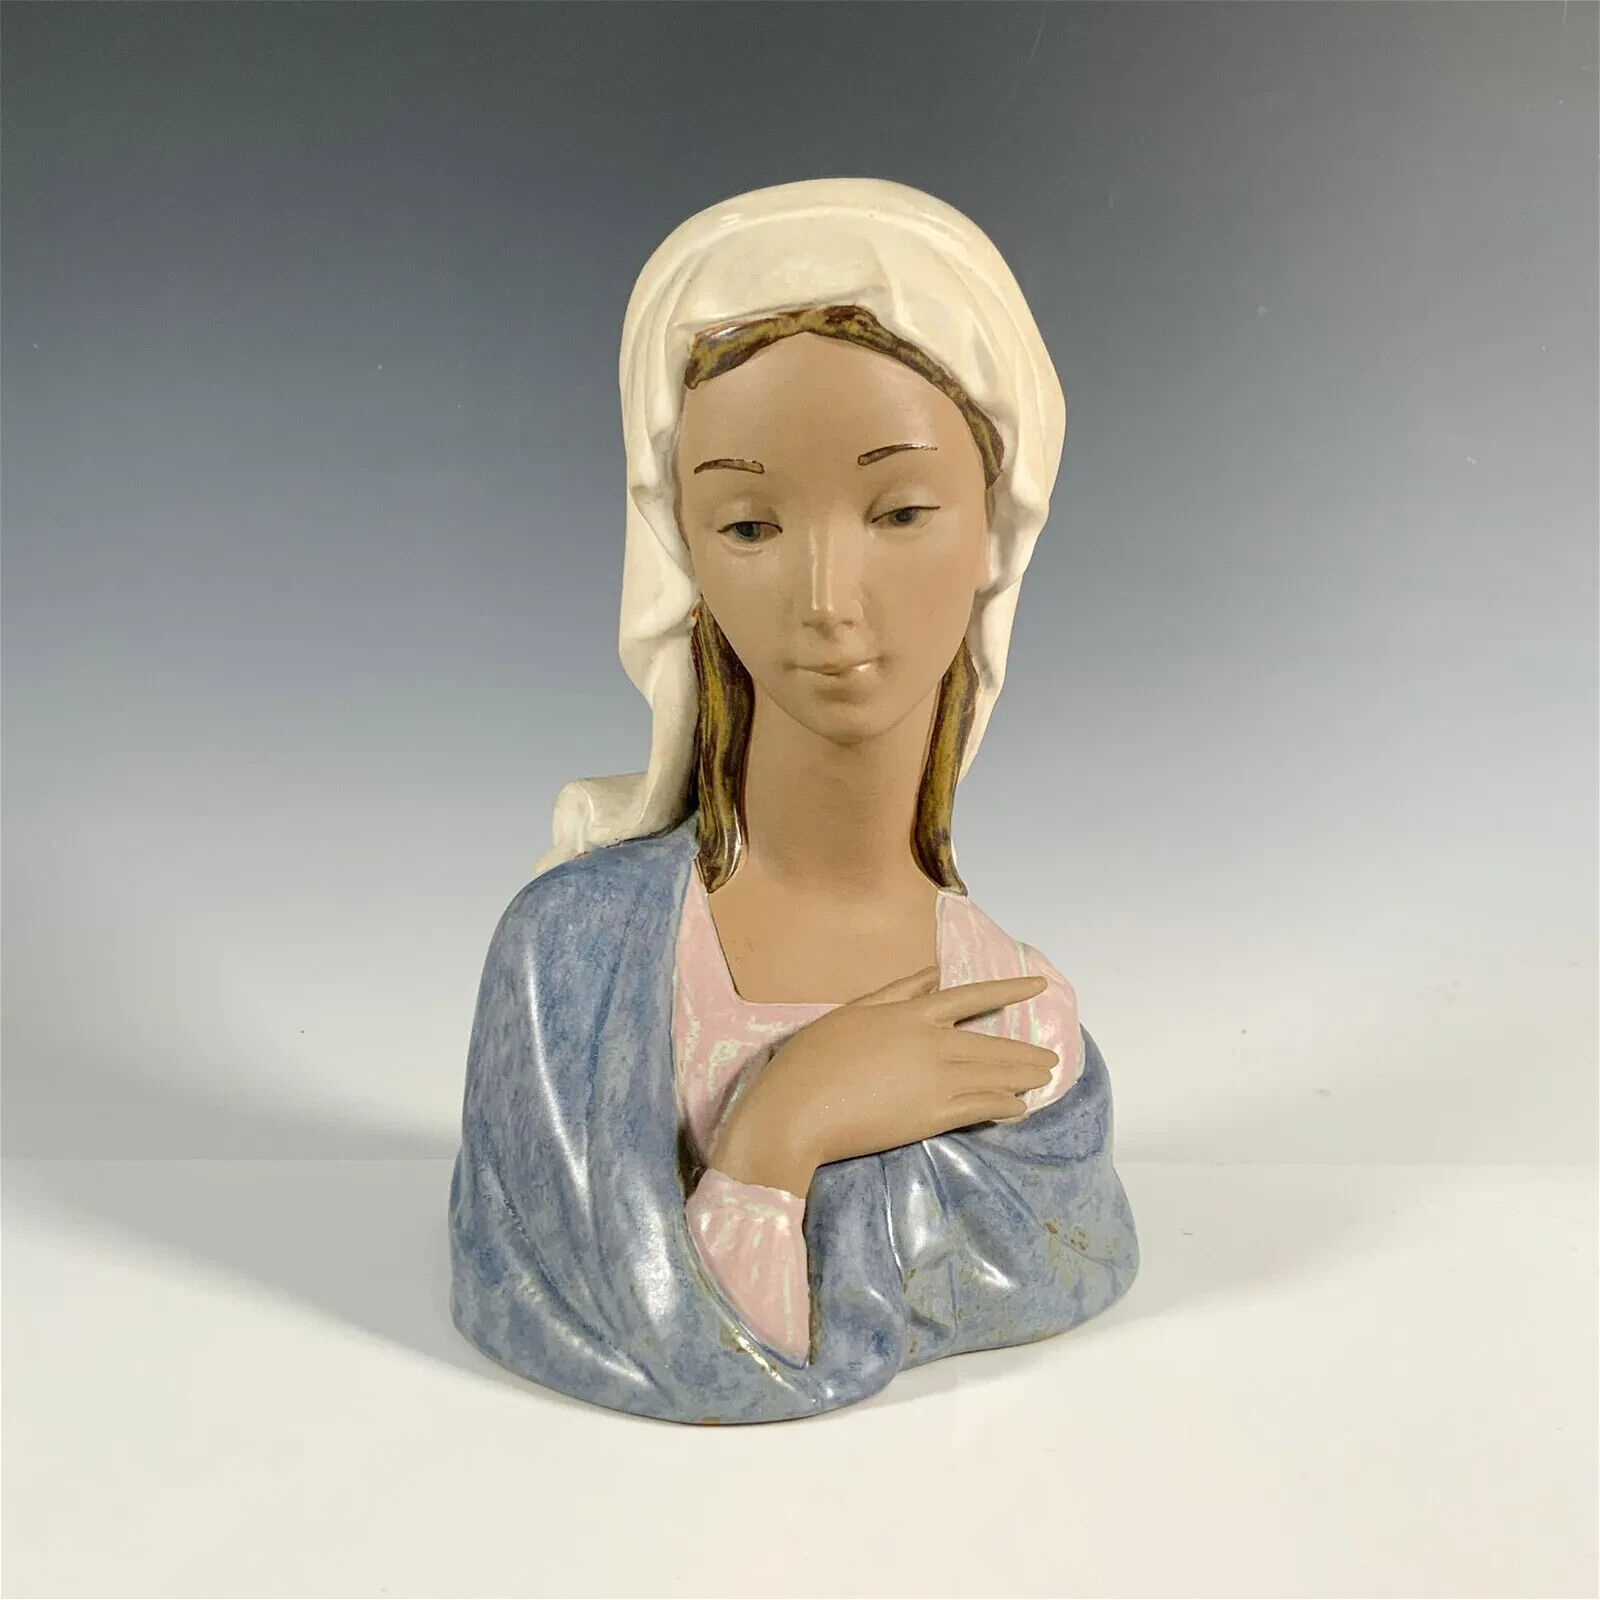 Lladro Porcelain Bust - Madonna Bust 1012264 with Box